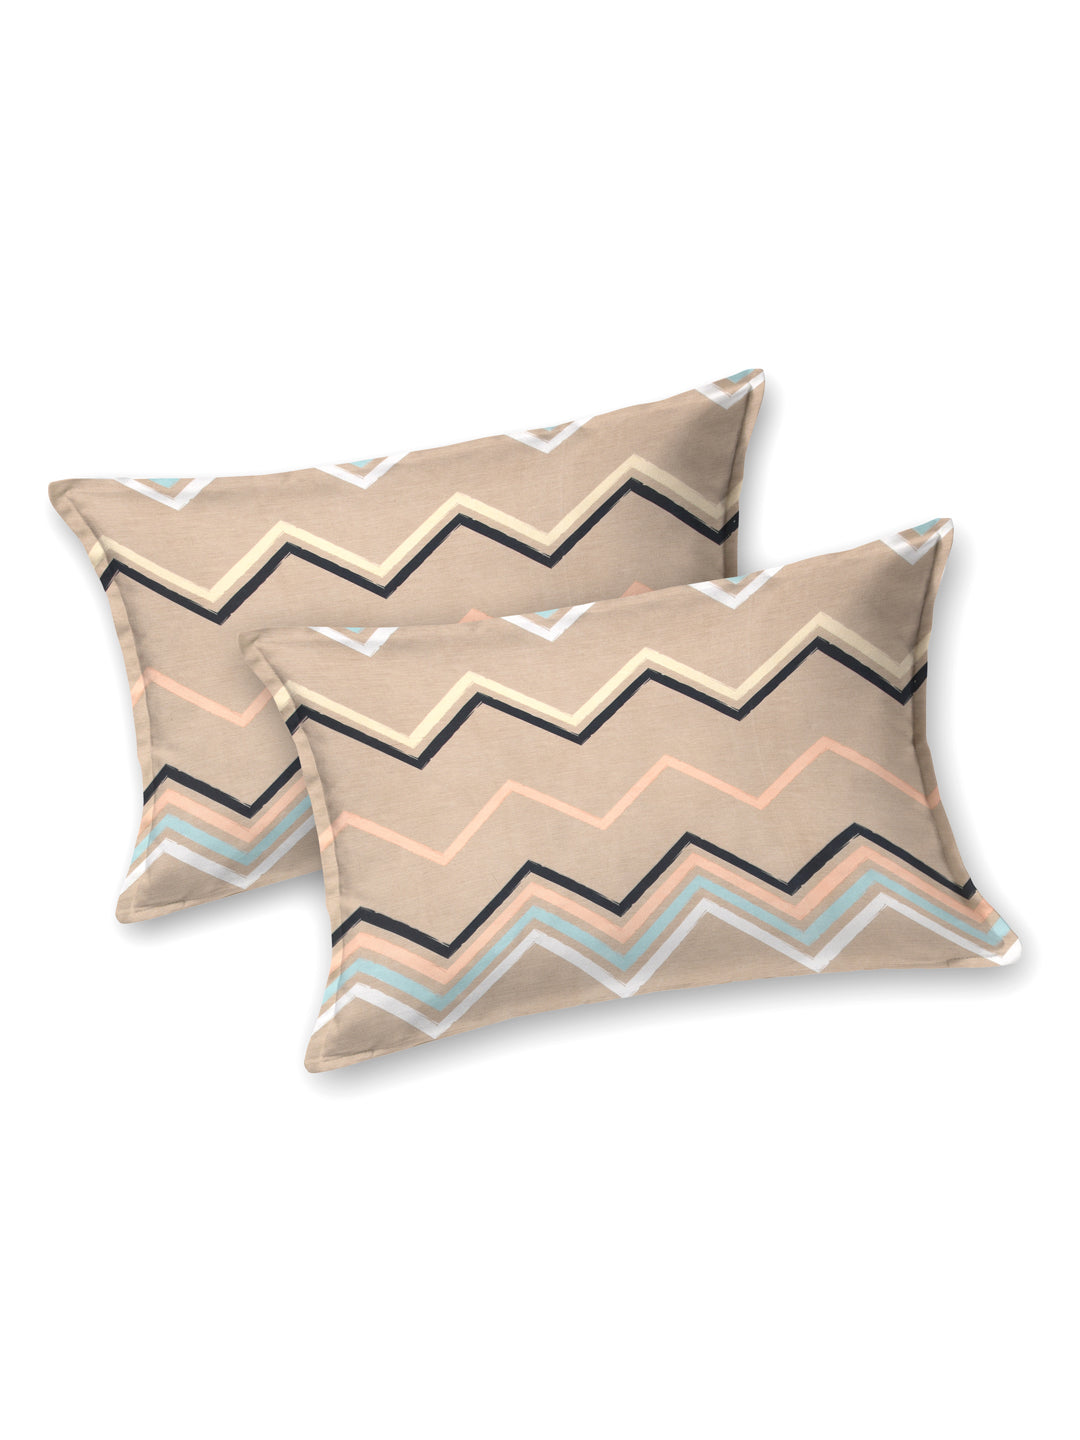 Fitted King Size Bedsheet With 2 Pillow Covers; ZigZag Lines On Brown